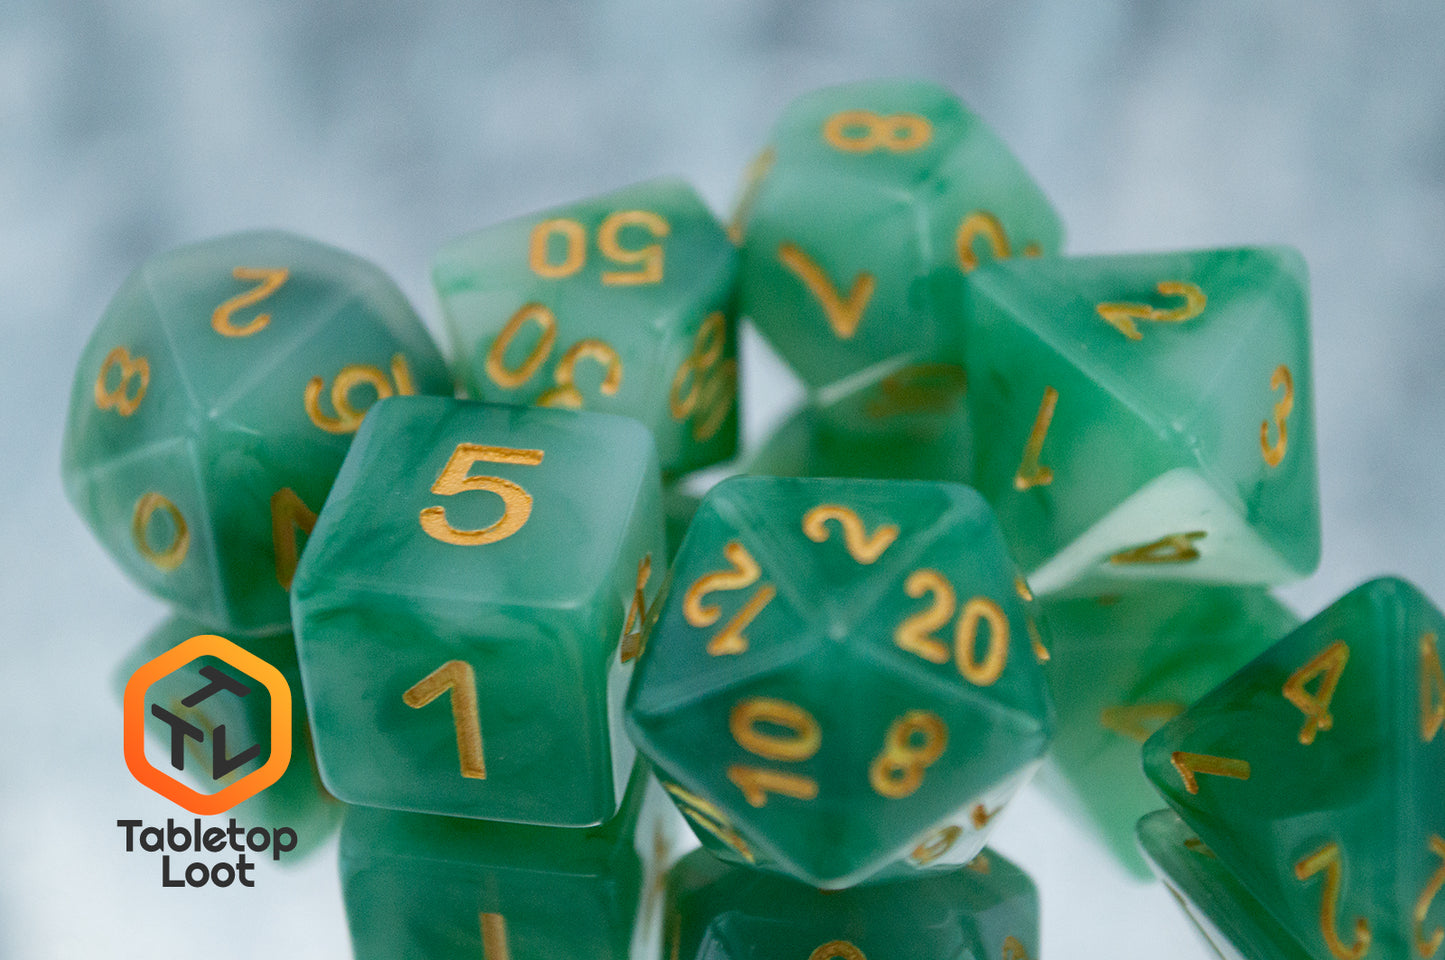 A close up of the Jade 7 piece dice set from Tabletop Loot with swirls of jade green and white resin and gold numbering.